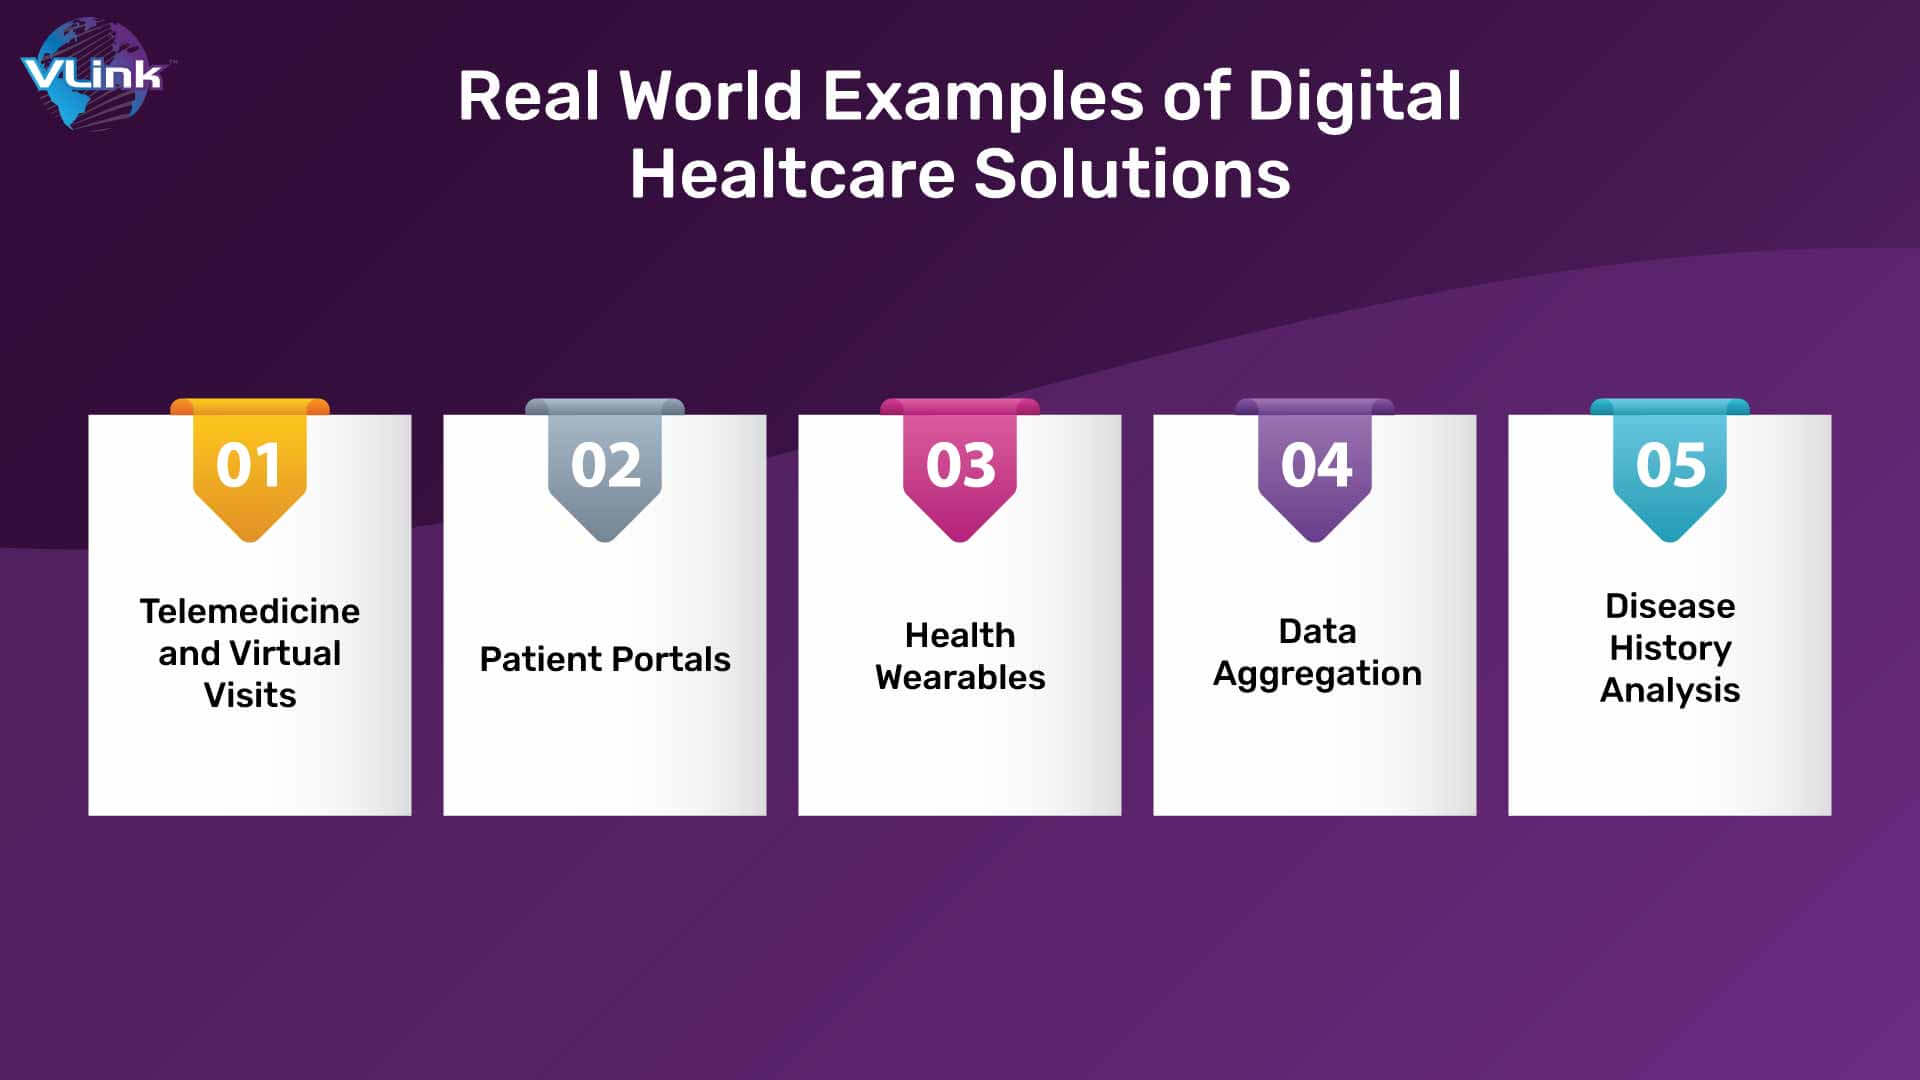 Real-World Examples of Digital Healthcare Solutions